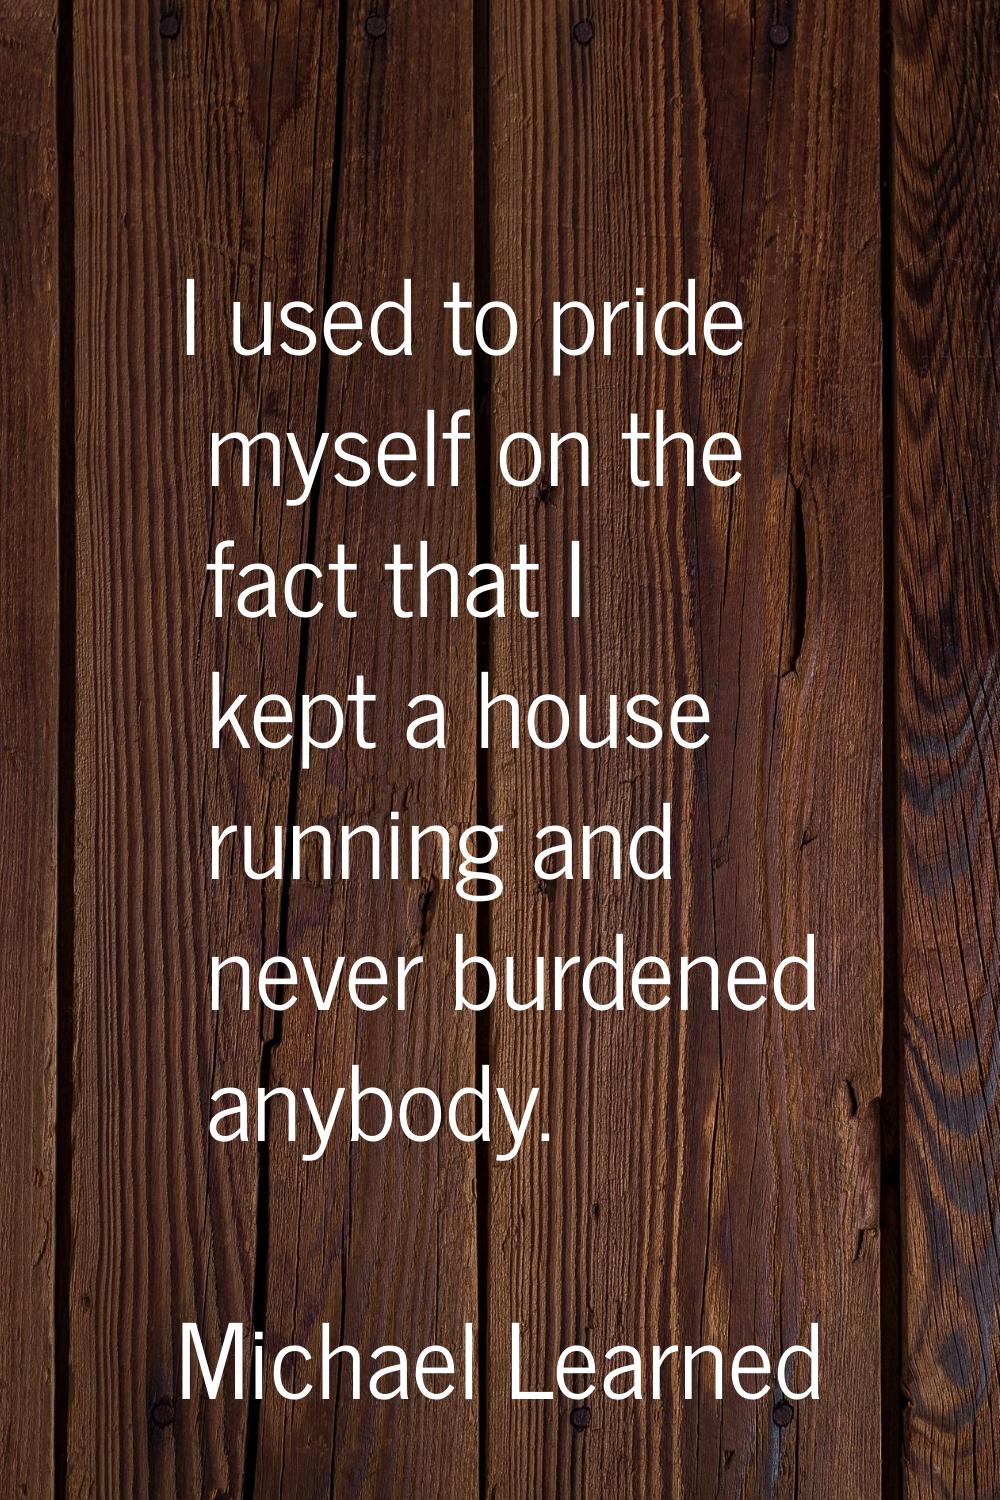 I used to pride myself on the fact that I kept a house running and never burdened anybody.